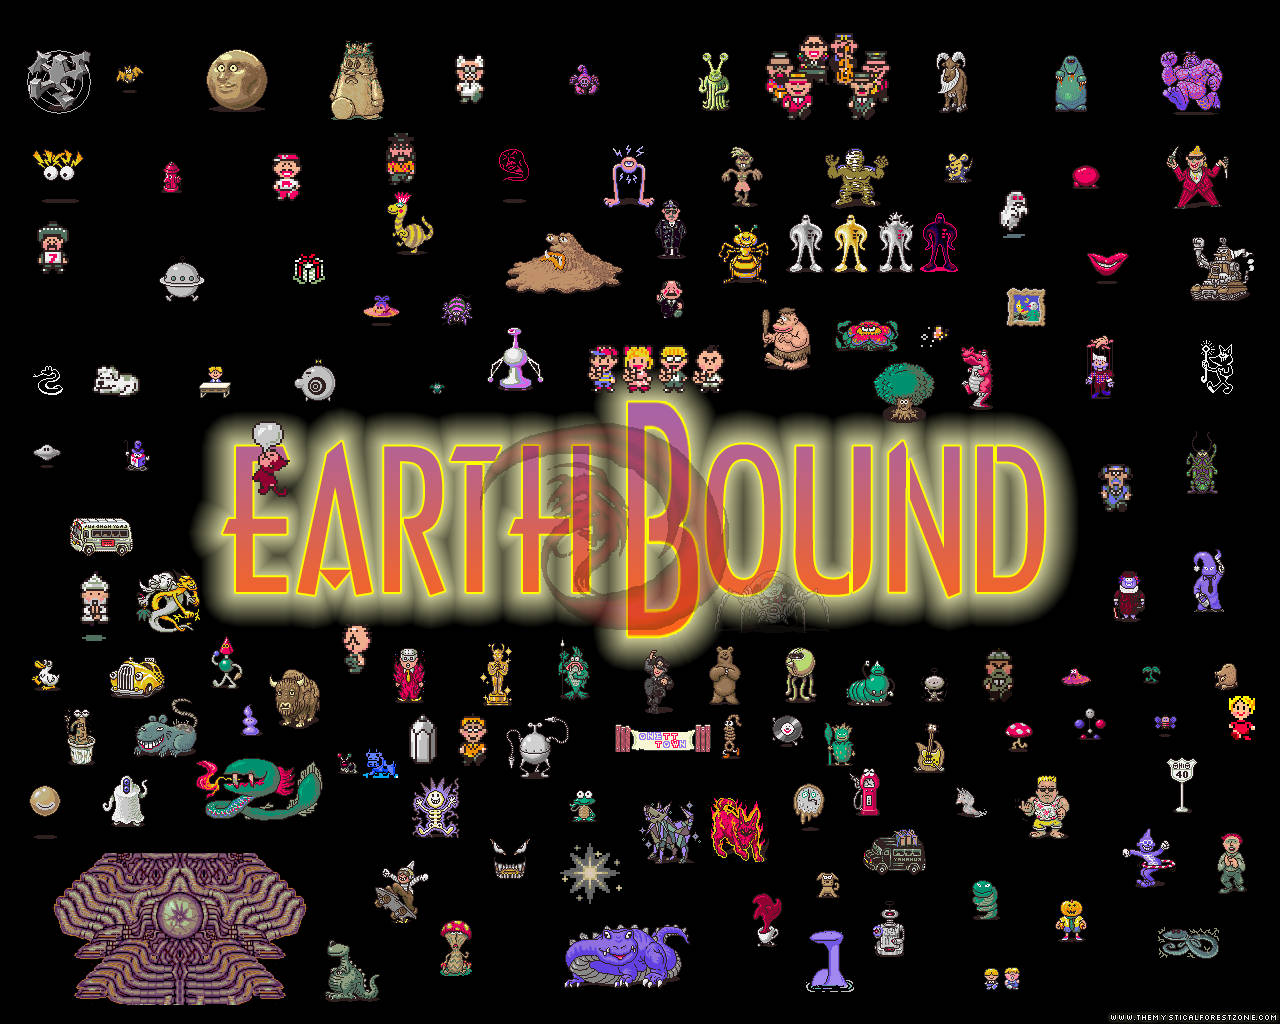 "The bonds between aliens and humans are indestructible - Earthbound" Wallpaper